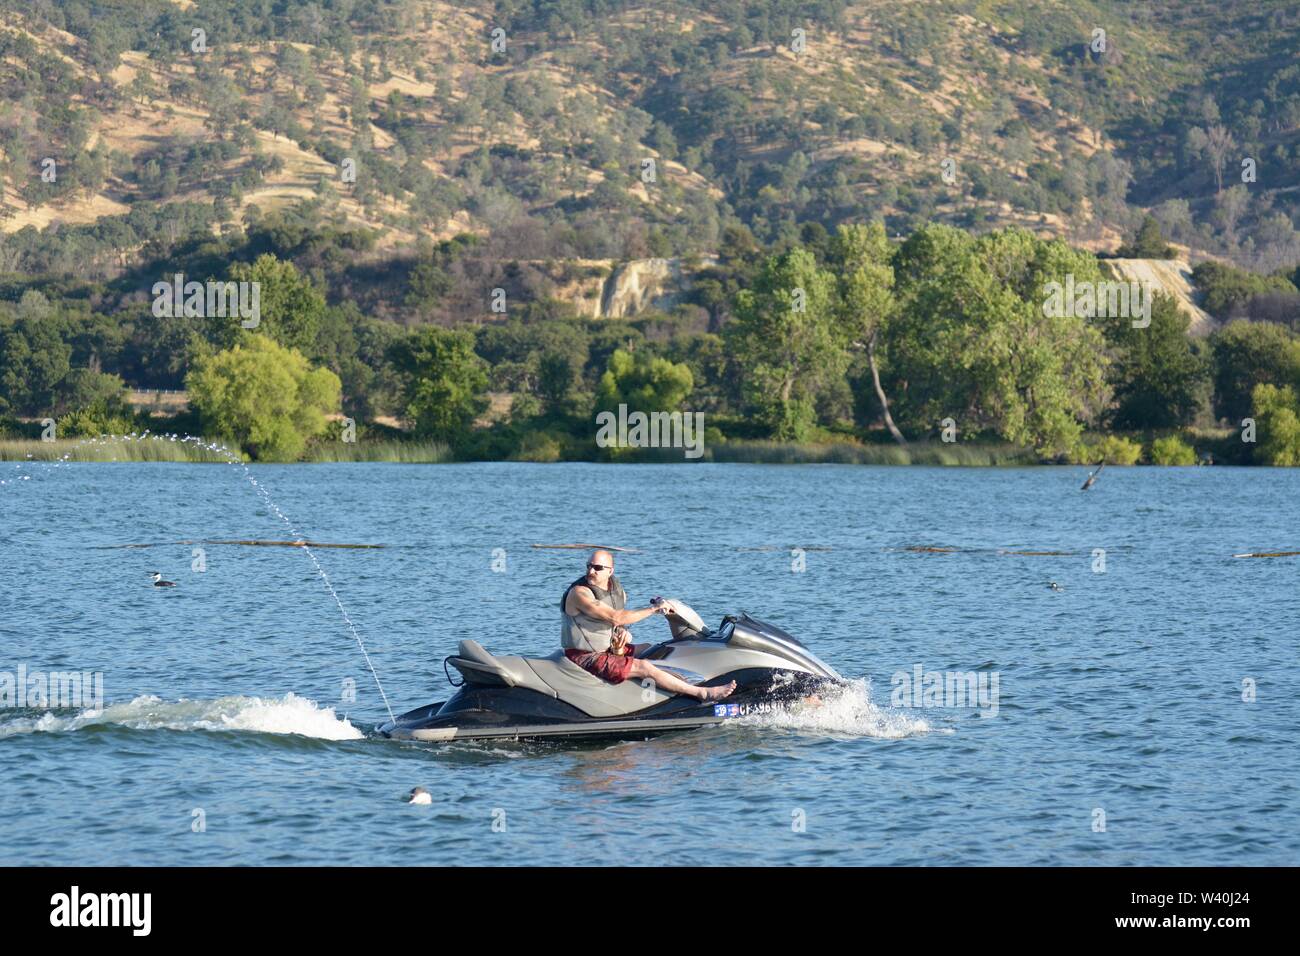 People On Jet Skis In Clear Lake Clearlake California Learning And